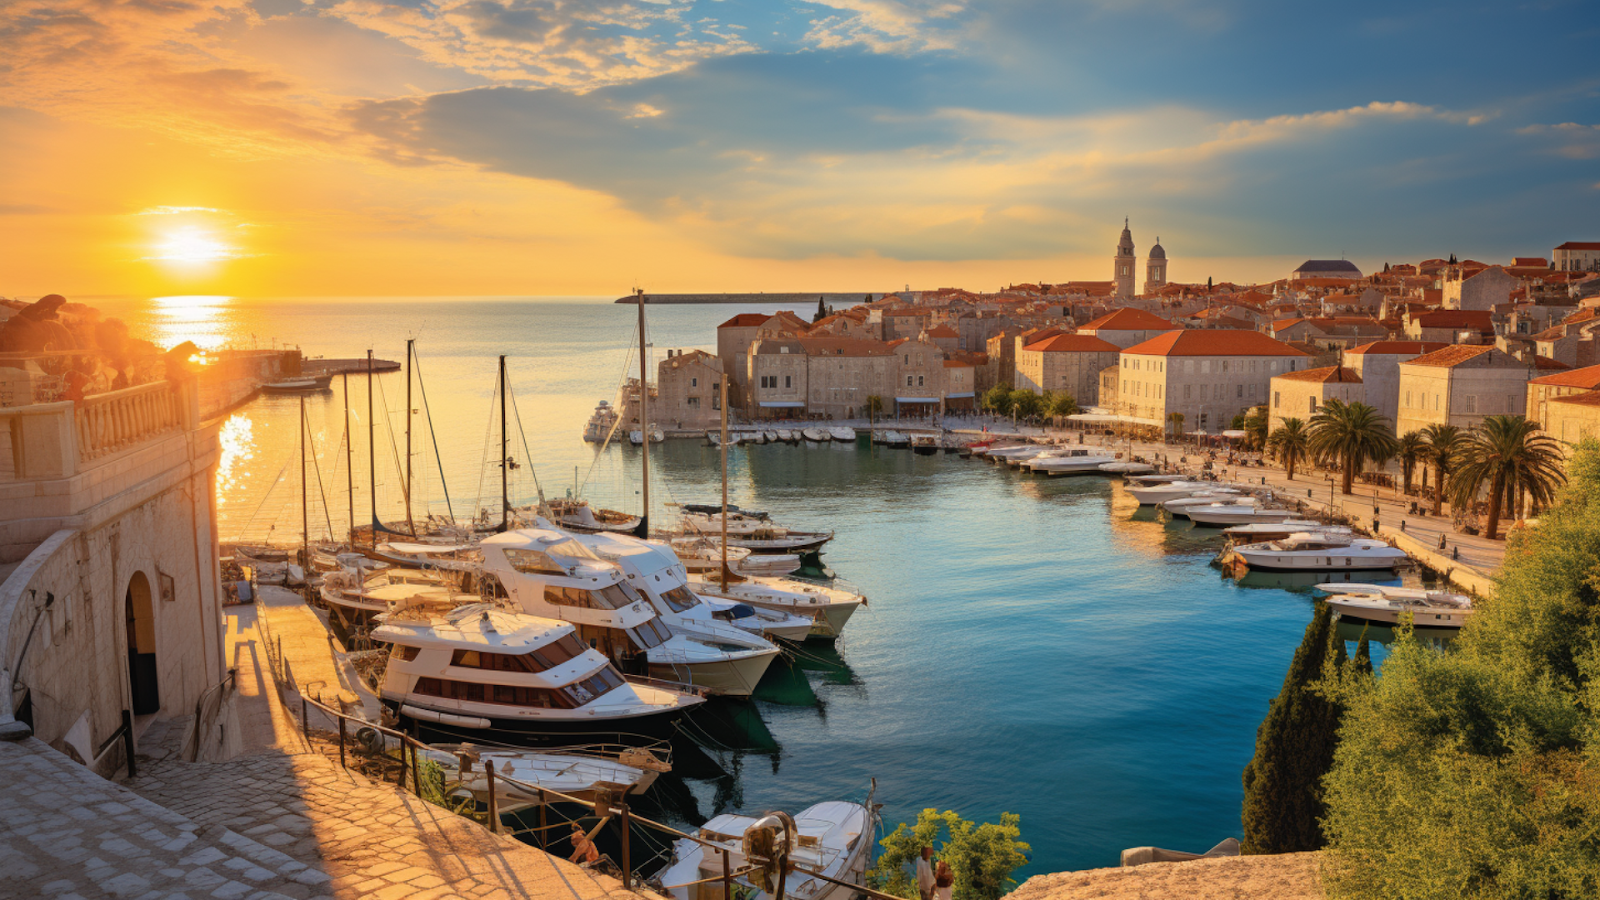 A breathtaking sunset view over the old town and marina of Split, illustrating the historic and picturesque seaside ambiance captured in many travel guides for Croatia.